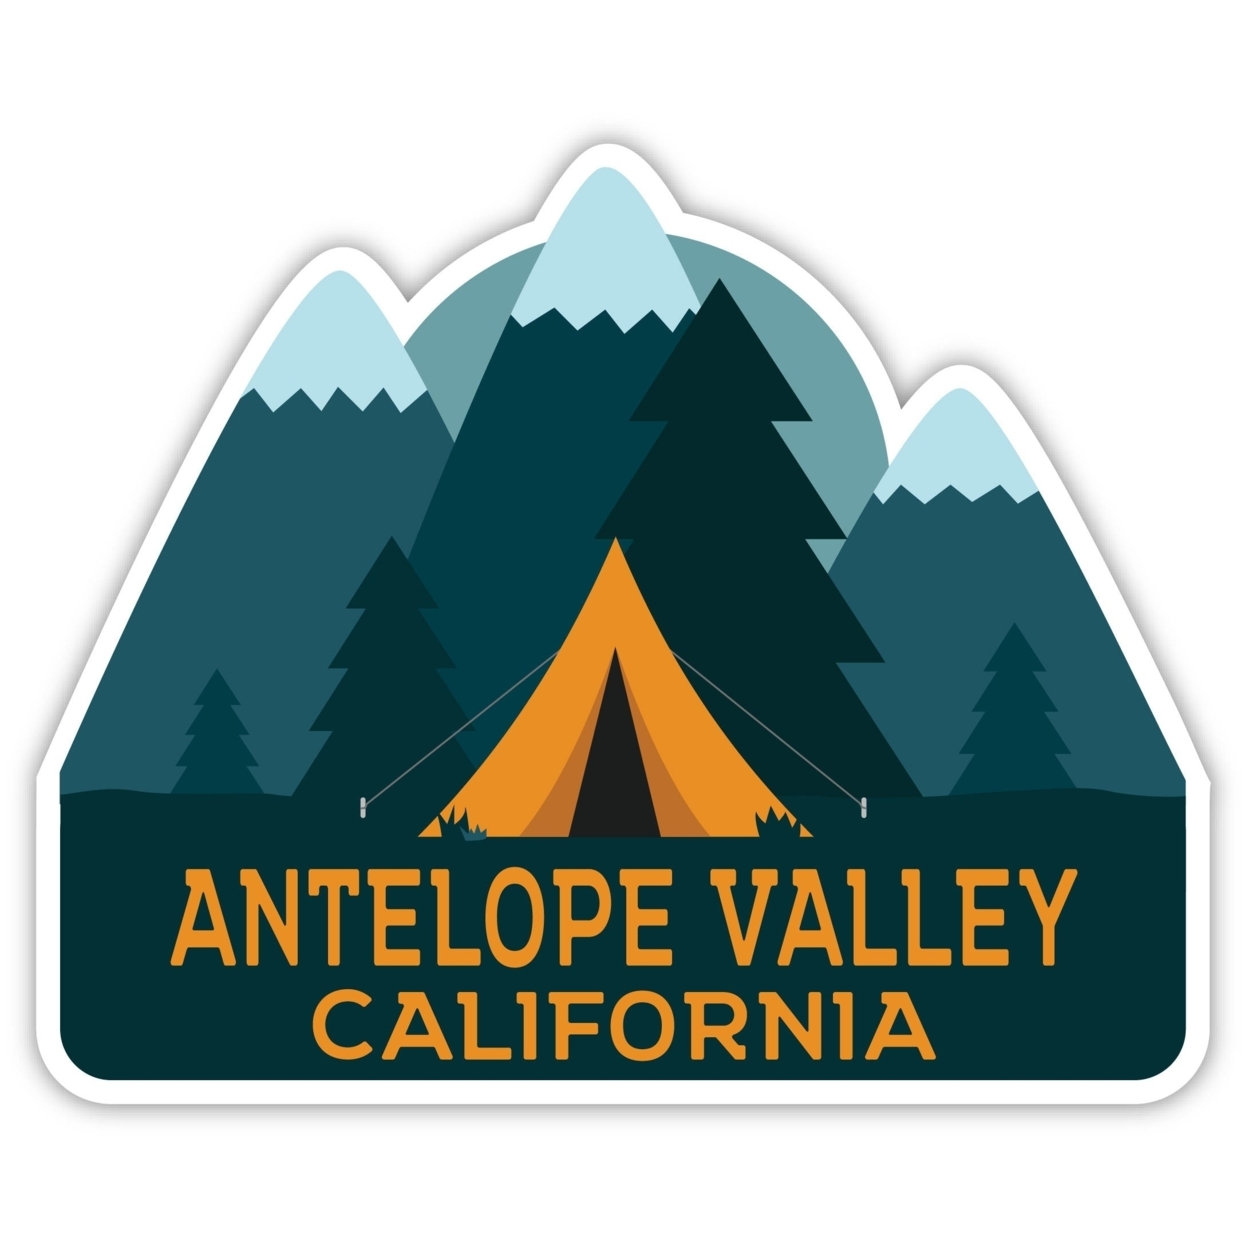 Antelope Valley California Souvenir Decorative Stickers (Choose Theme And Size) - Single Unit, 8-Inch, Bear